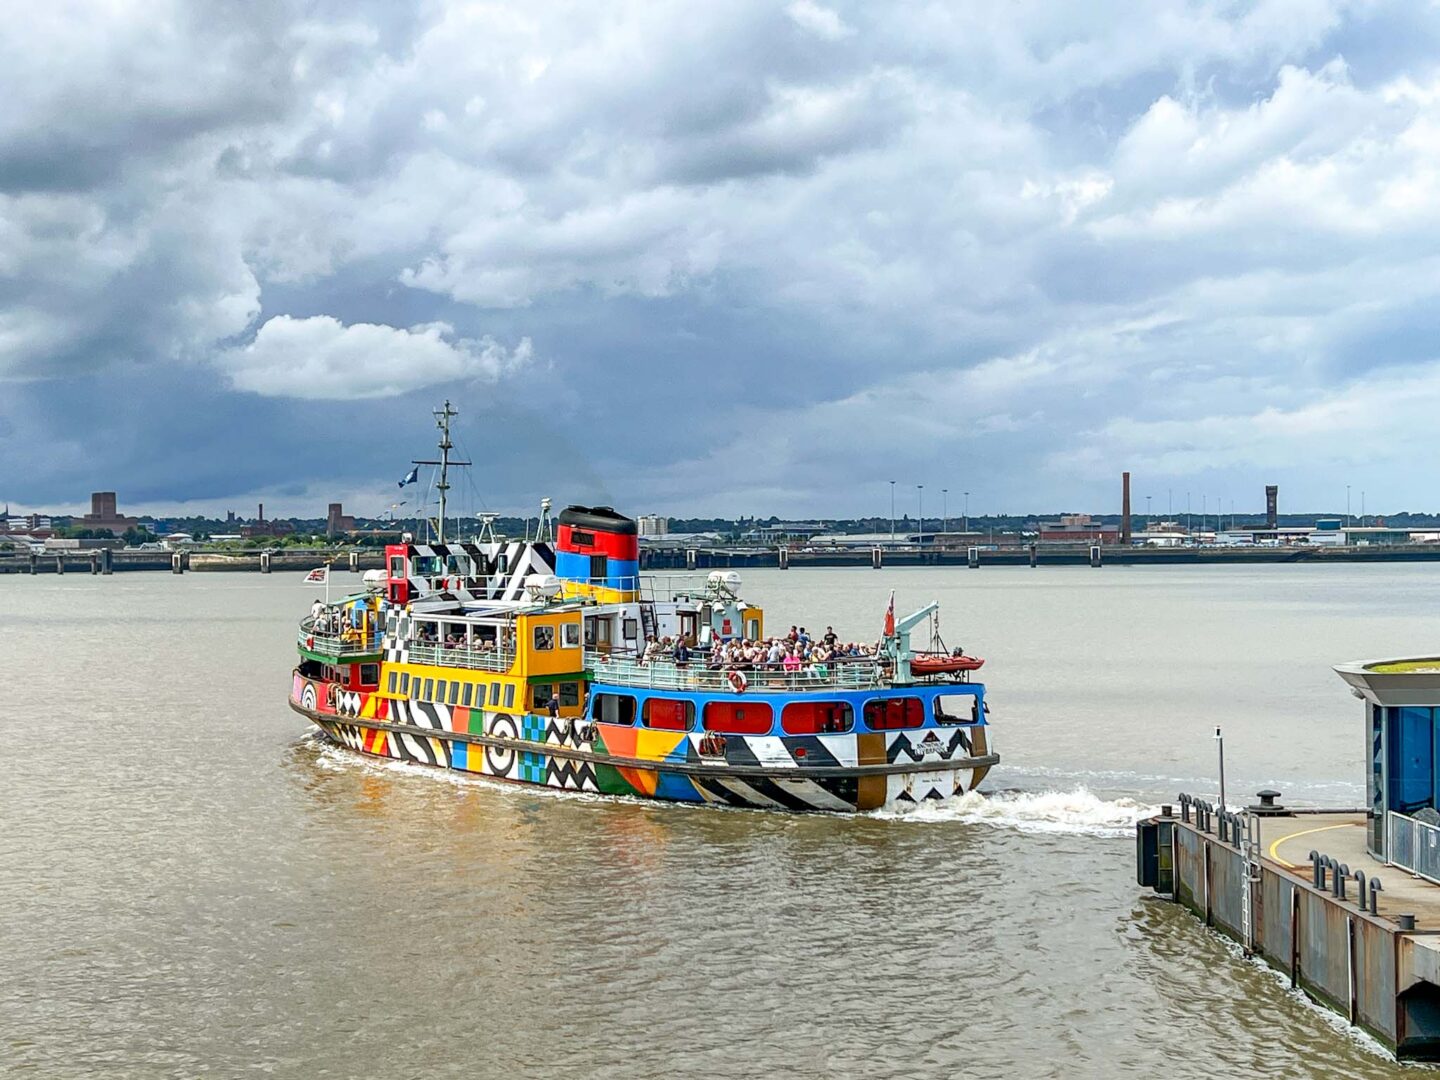 Weekend in Liverpool, Mersey Ferry on the River